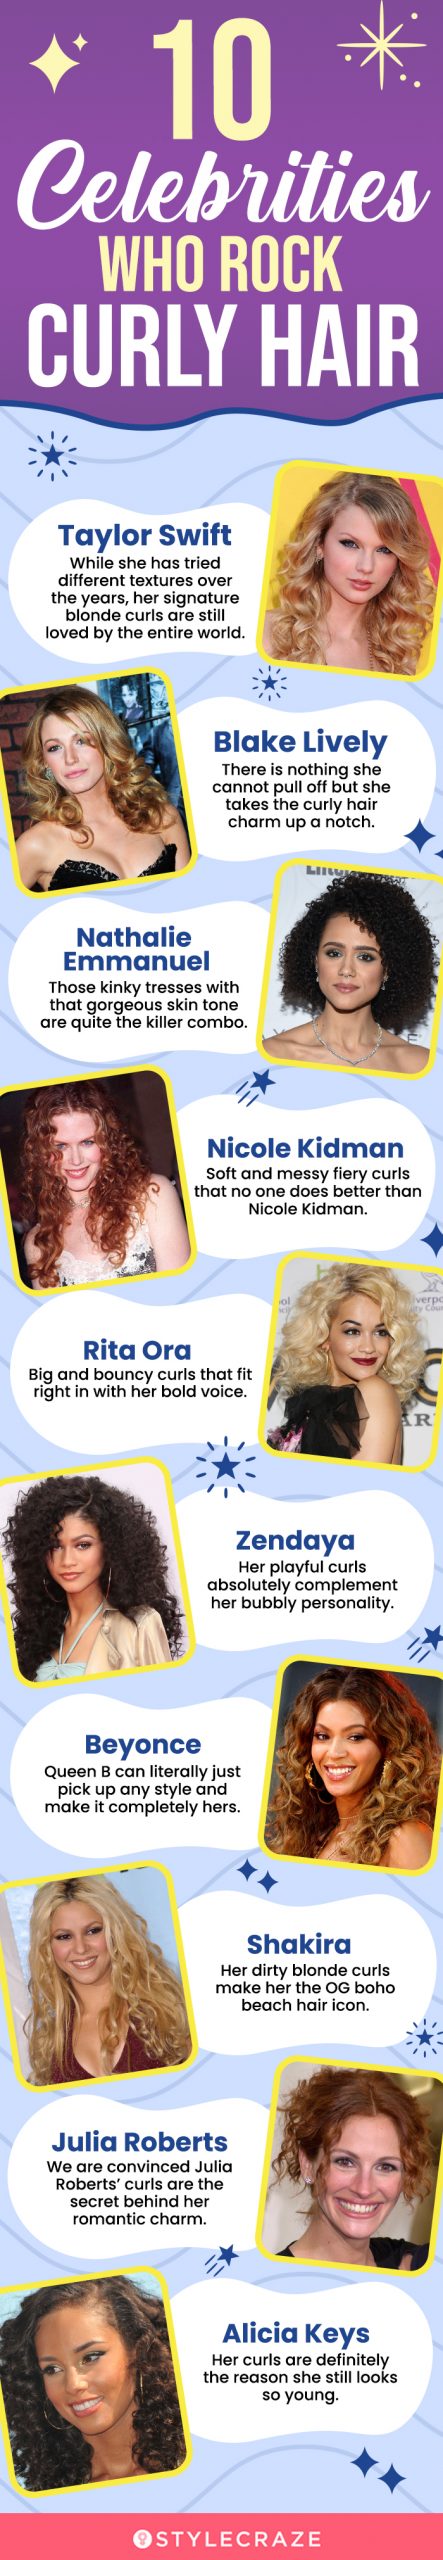 10 celebrities who rock curly hair (infographic)